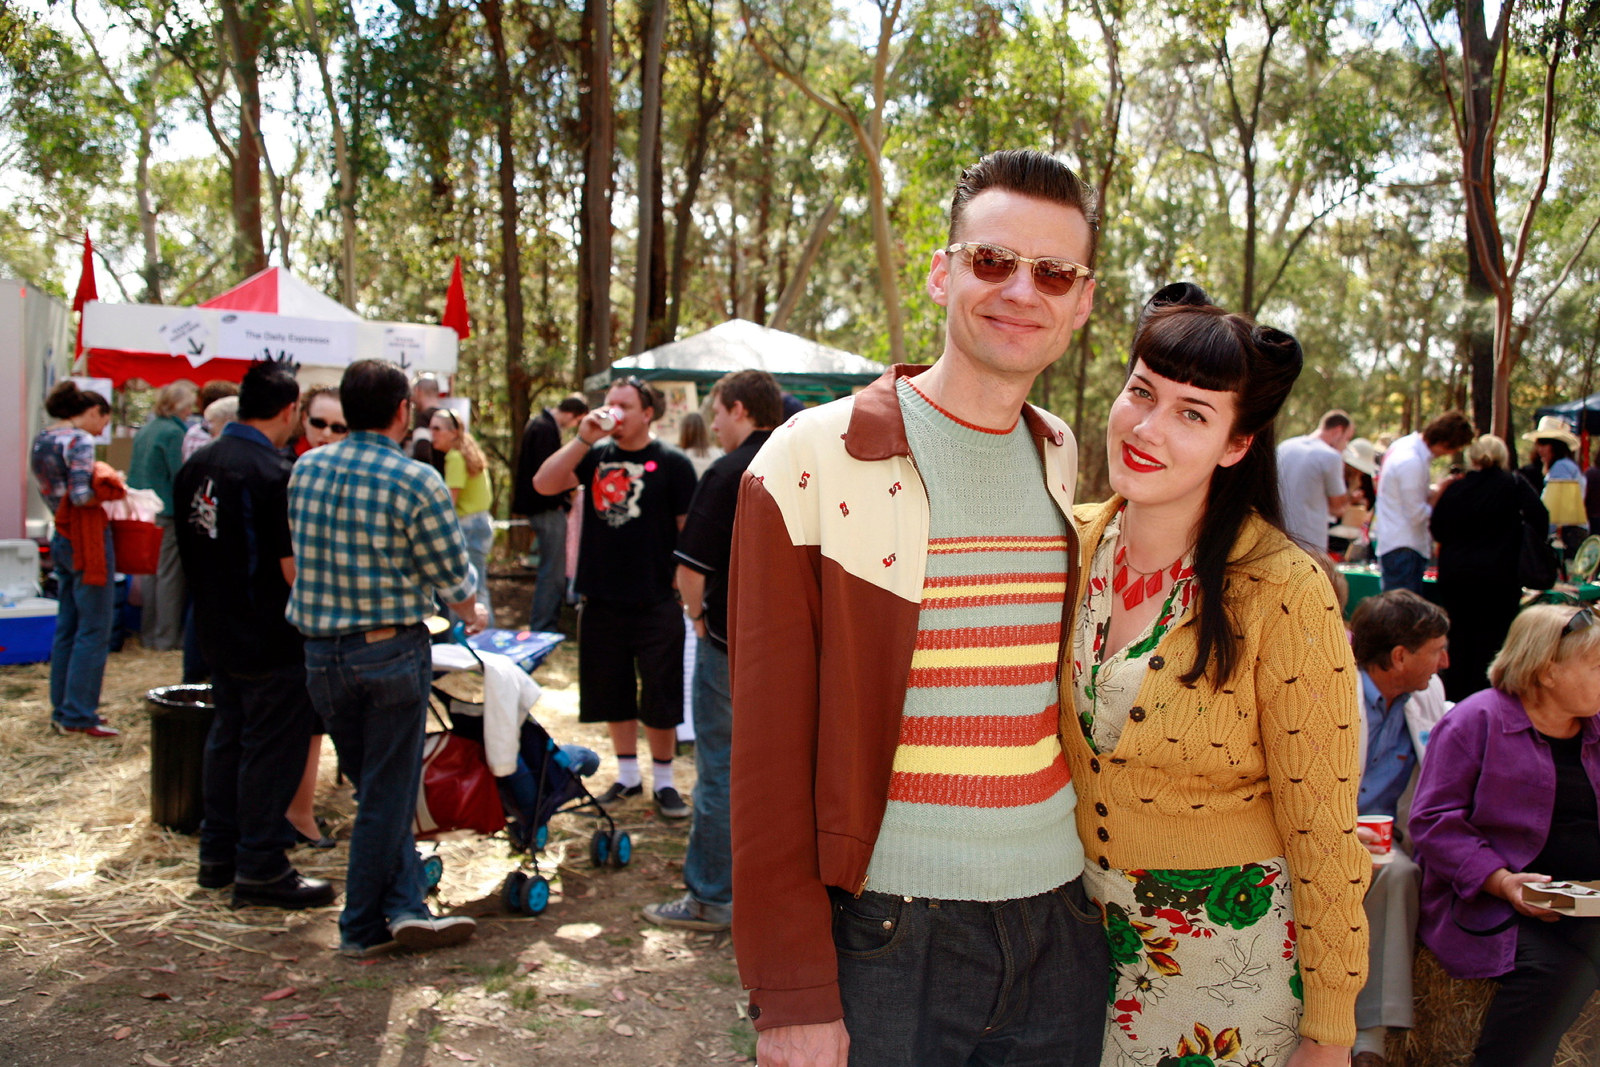 Rockabilly visitors dressed up for the Fifties Fair